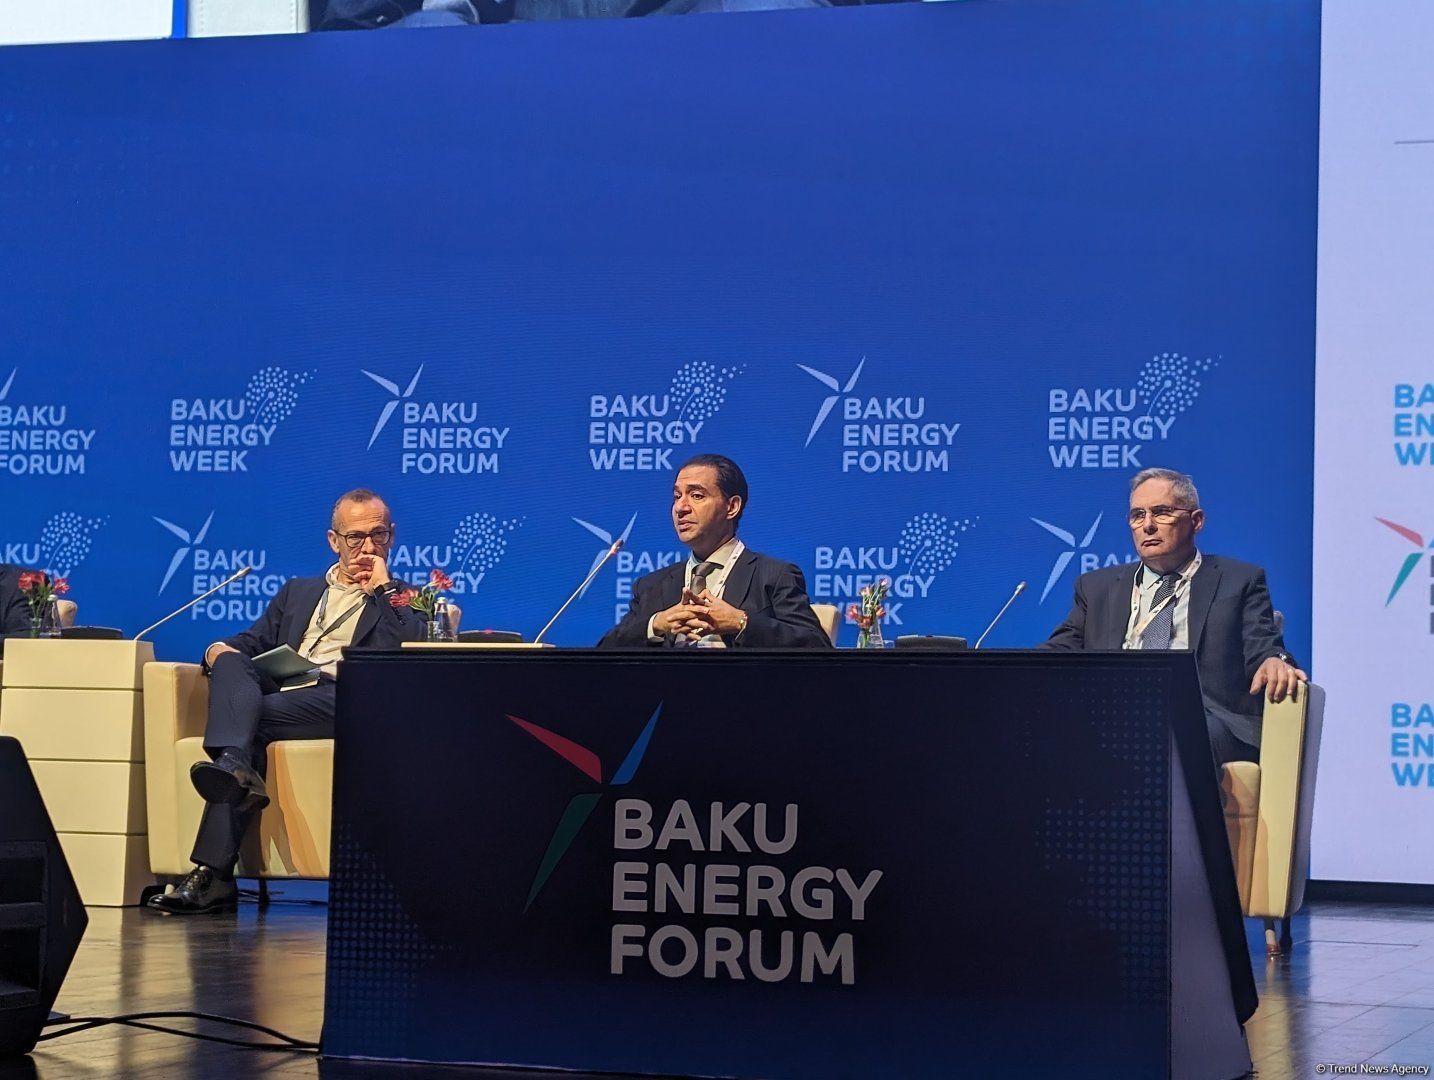 Final stages reached in talks for Wind Power Plants in Azerbaijan, Acwa Power VP says